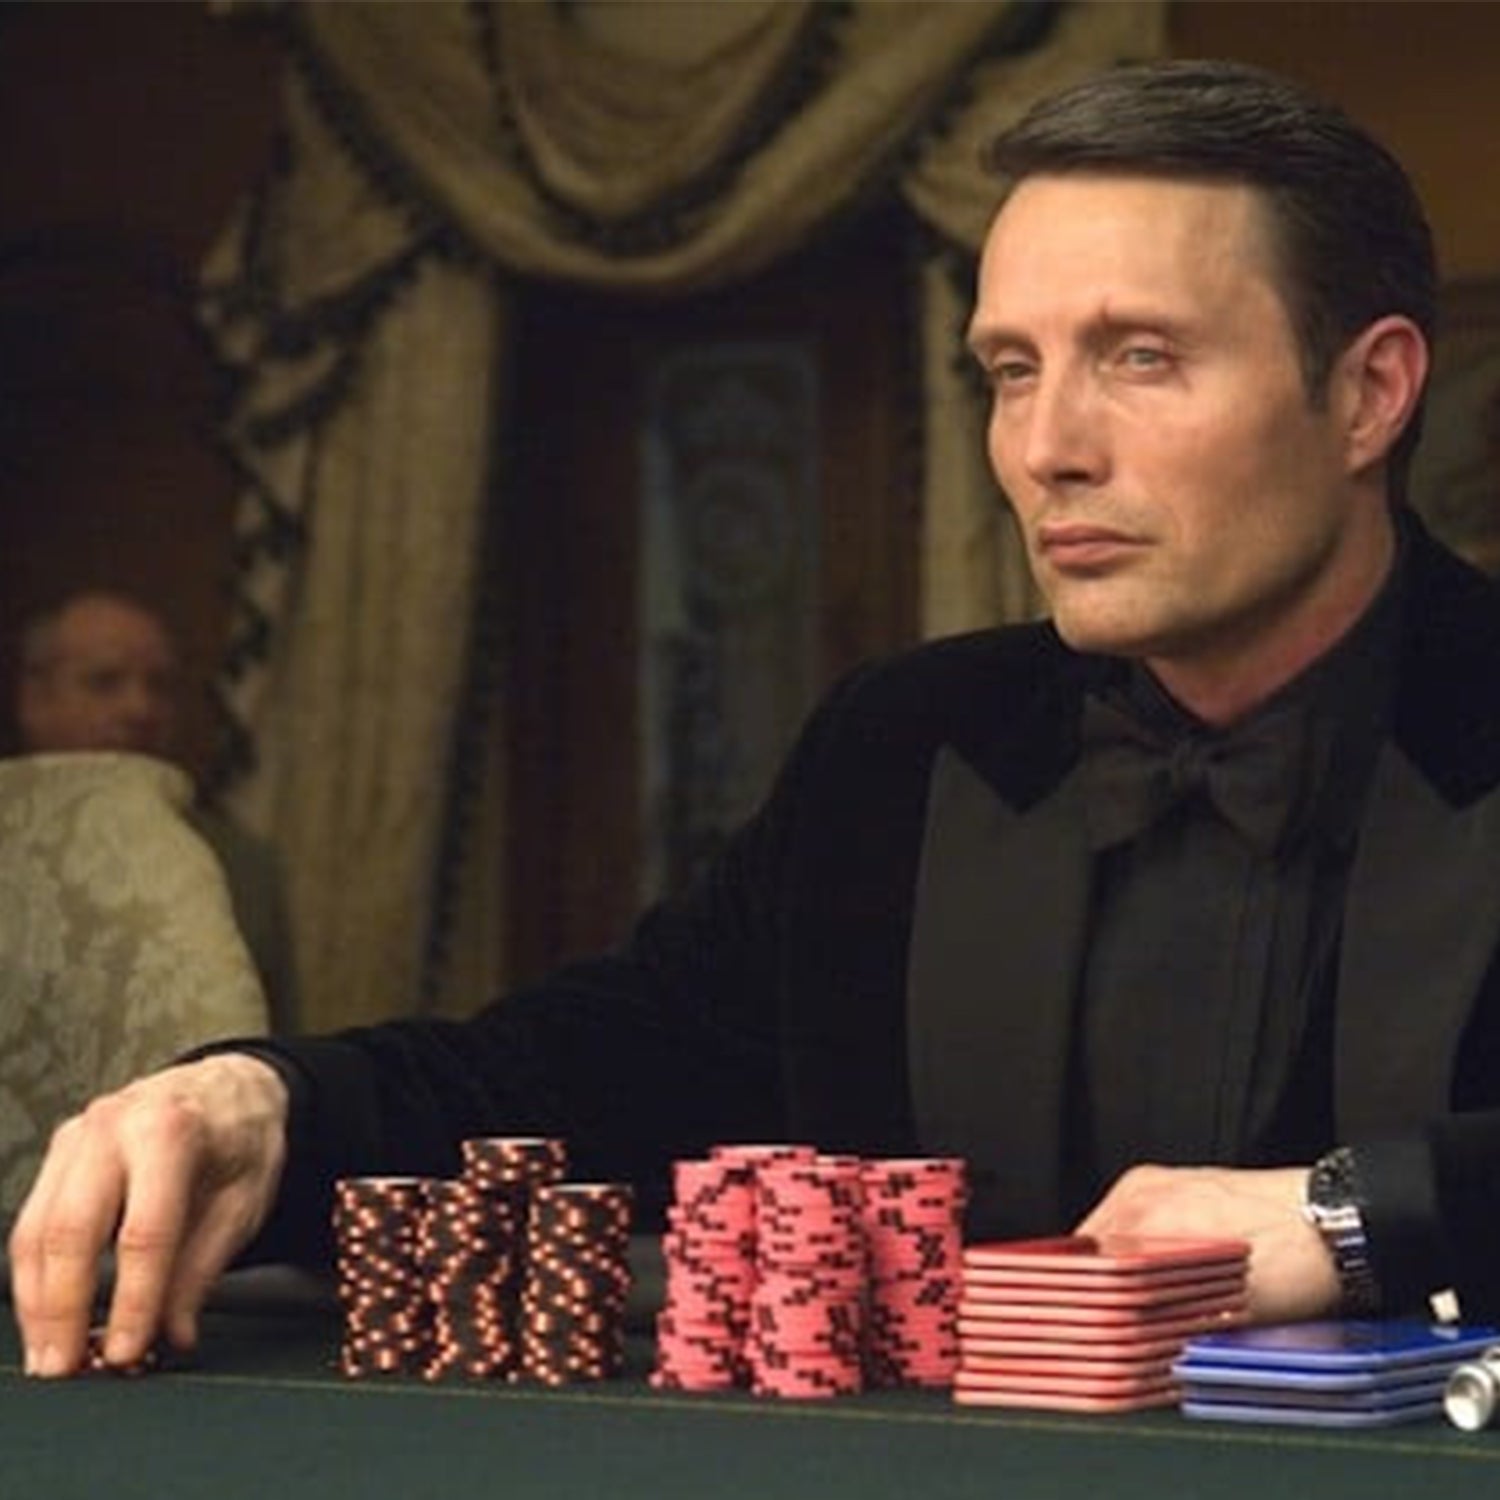 "Anyone want to play poker...?"